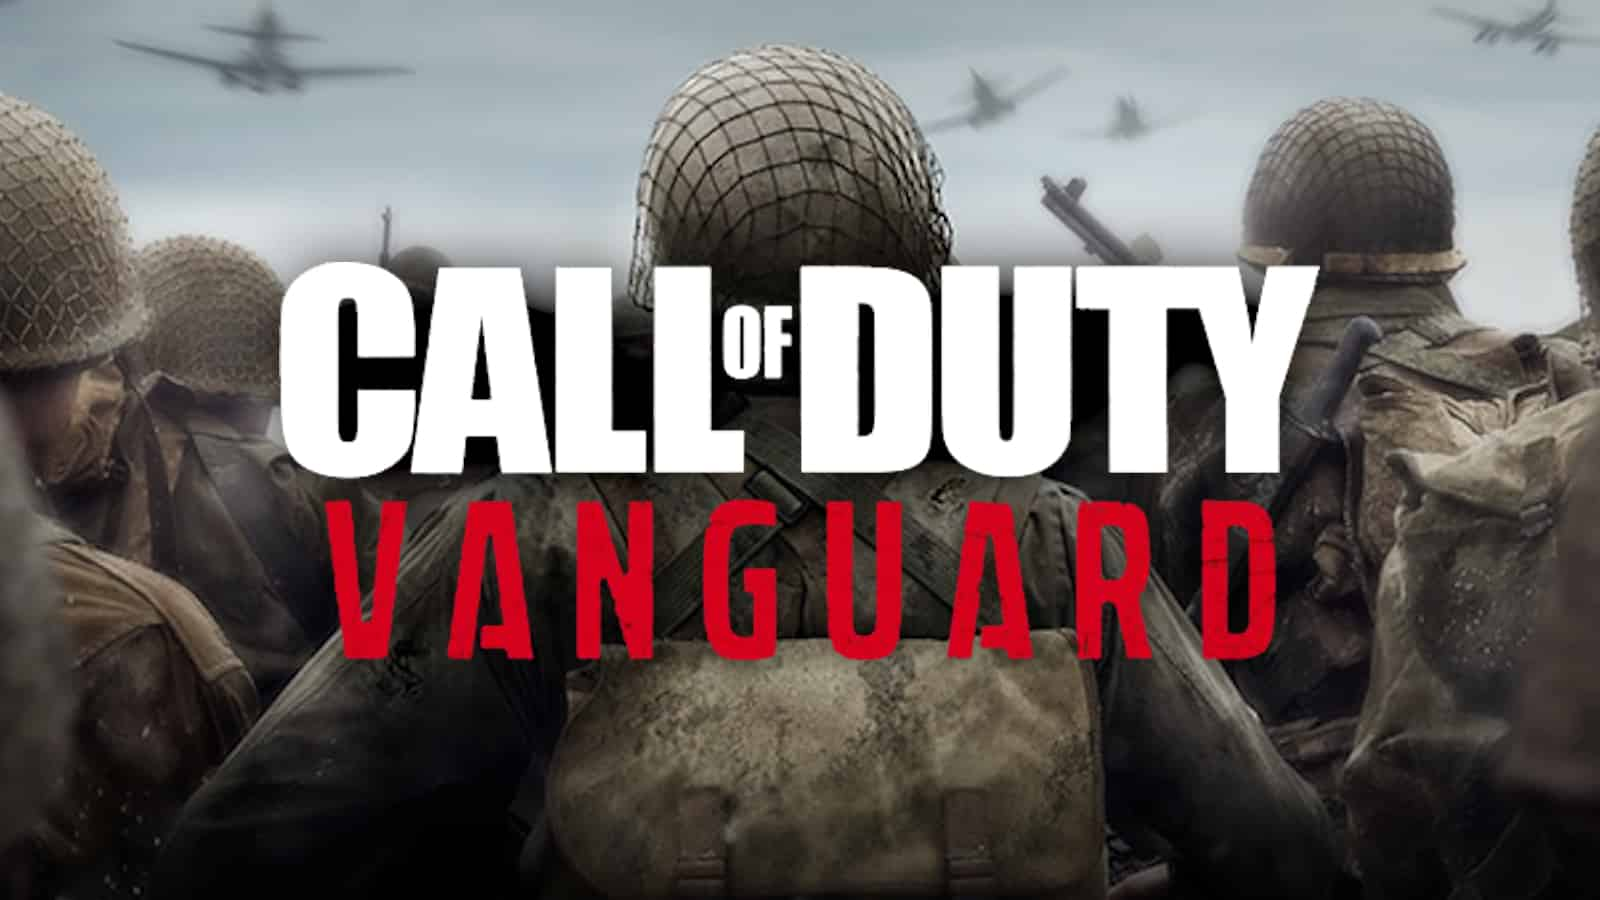 Call of Duty: Vanguard's alpha and beta dates have been announced